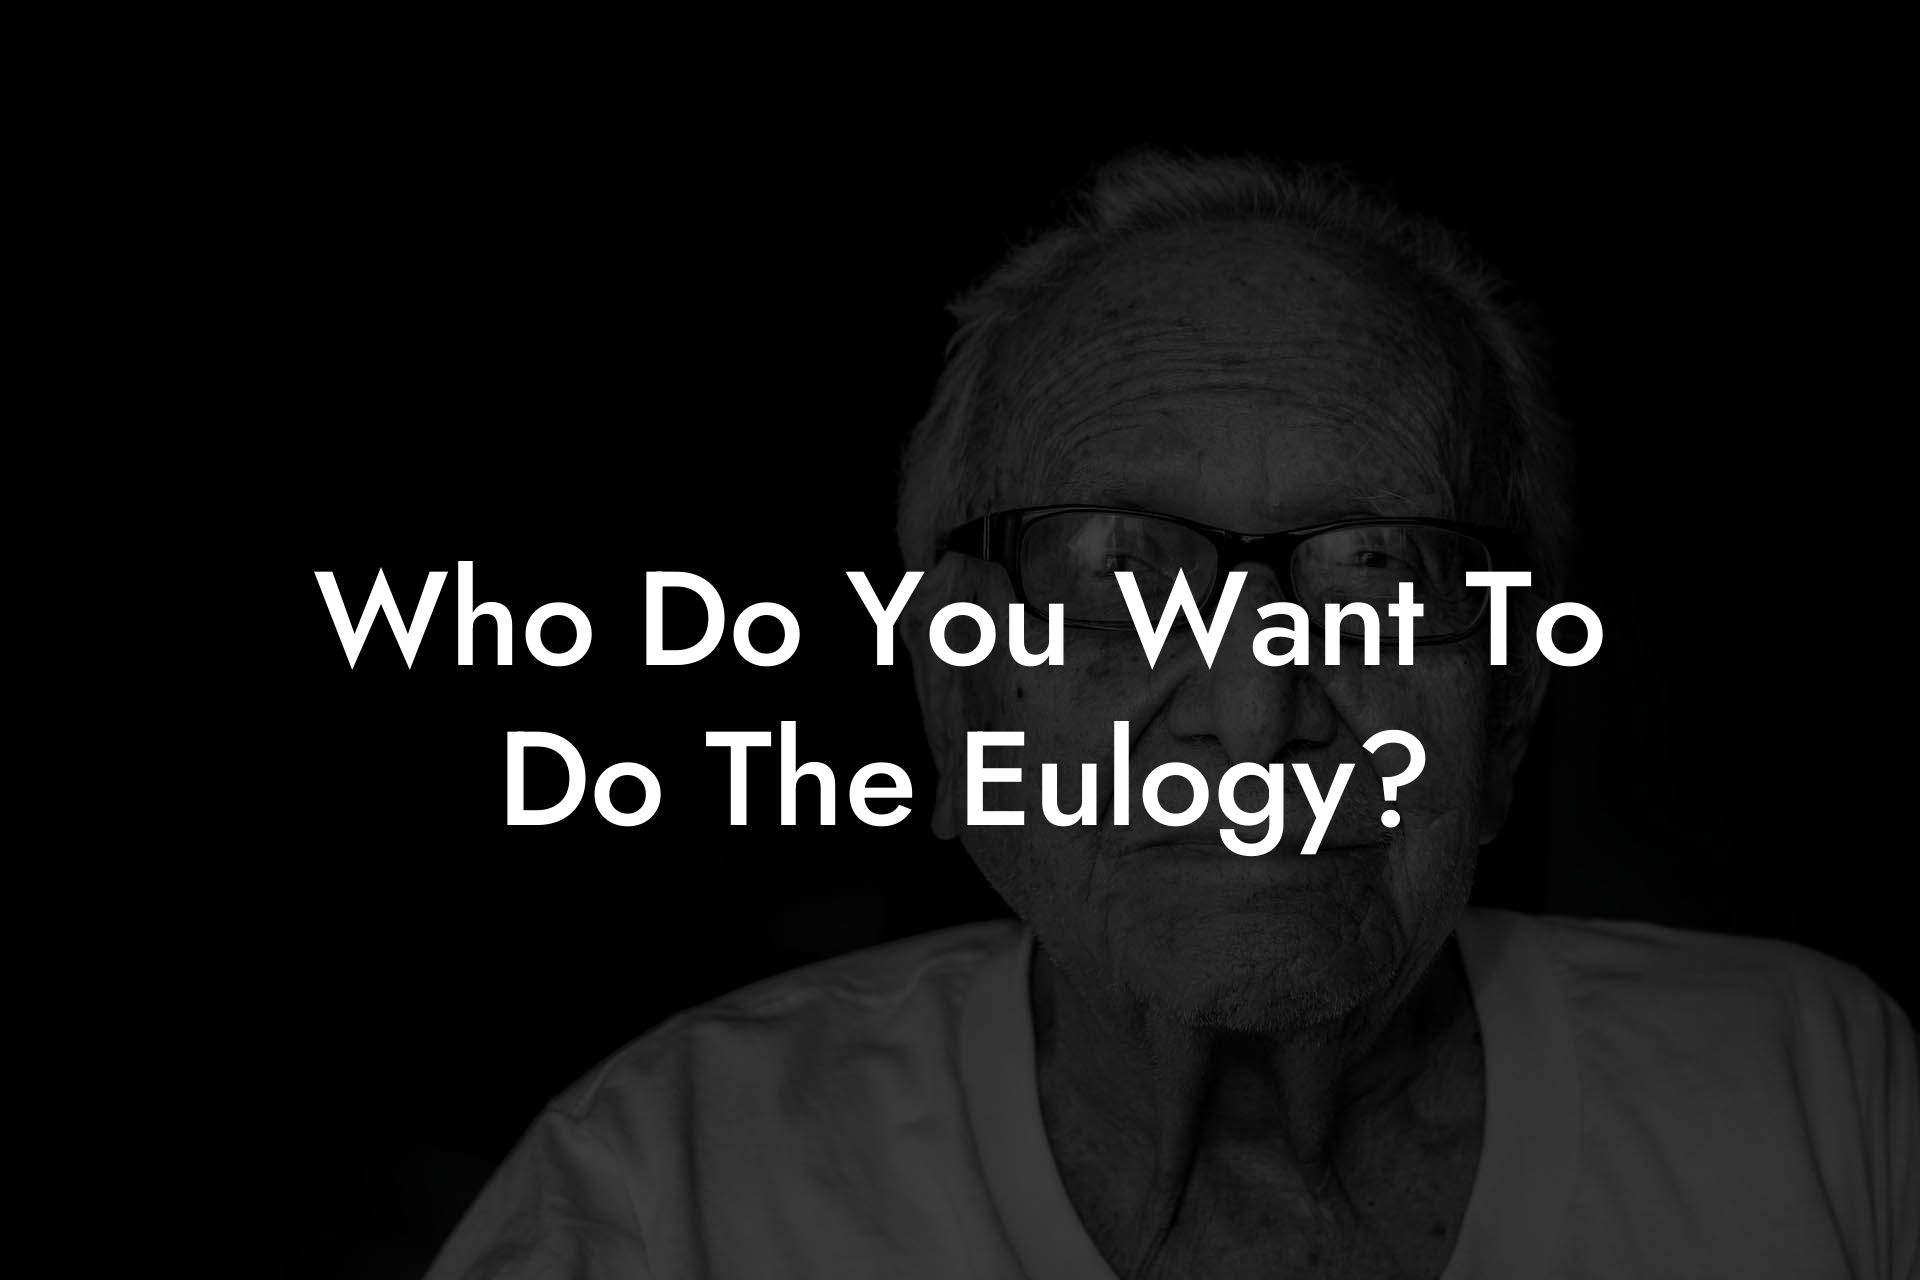 Who Do You Want To Do The Eulogy?